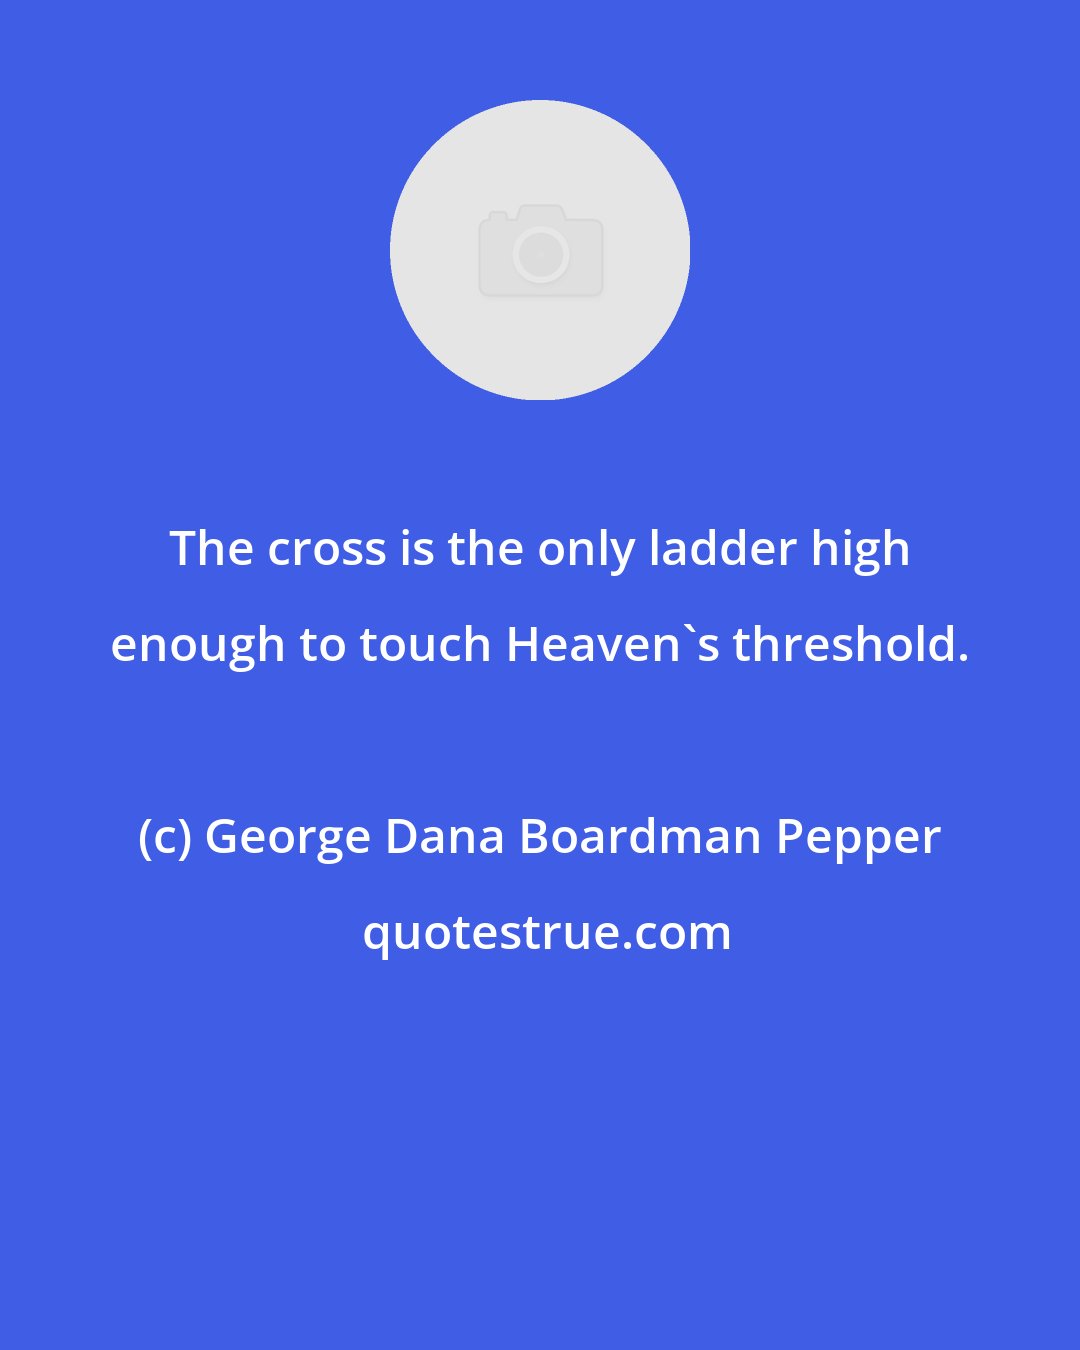 George Dana Boardman Pepper: The cross is the only ladder high enough to touch Heaven's threshold.